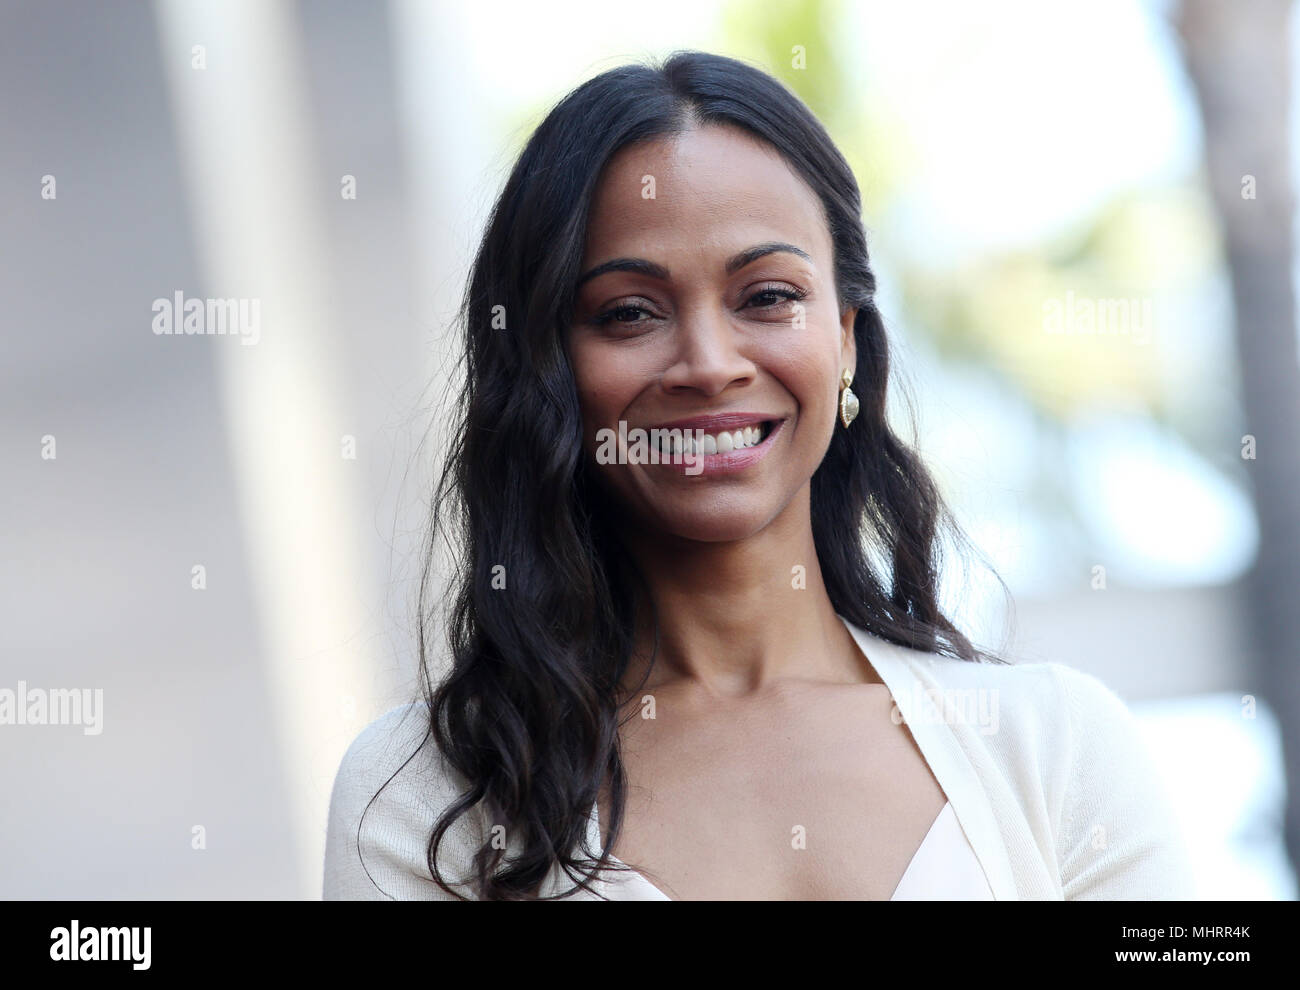 Hollywood, Ca. 3rd May, 2018. Zoe Saldana at the ceremony honoring actress Zoe Saldana with a star on Hollywood Walk Of Fame in Hollywood, California on May 3, 2018. Credit: Faye Sadou/Media Punch/Alamy Live News Stock Photo